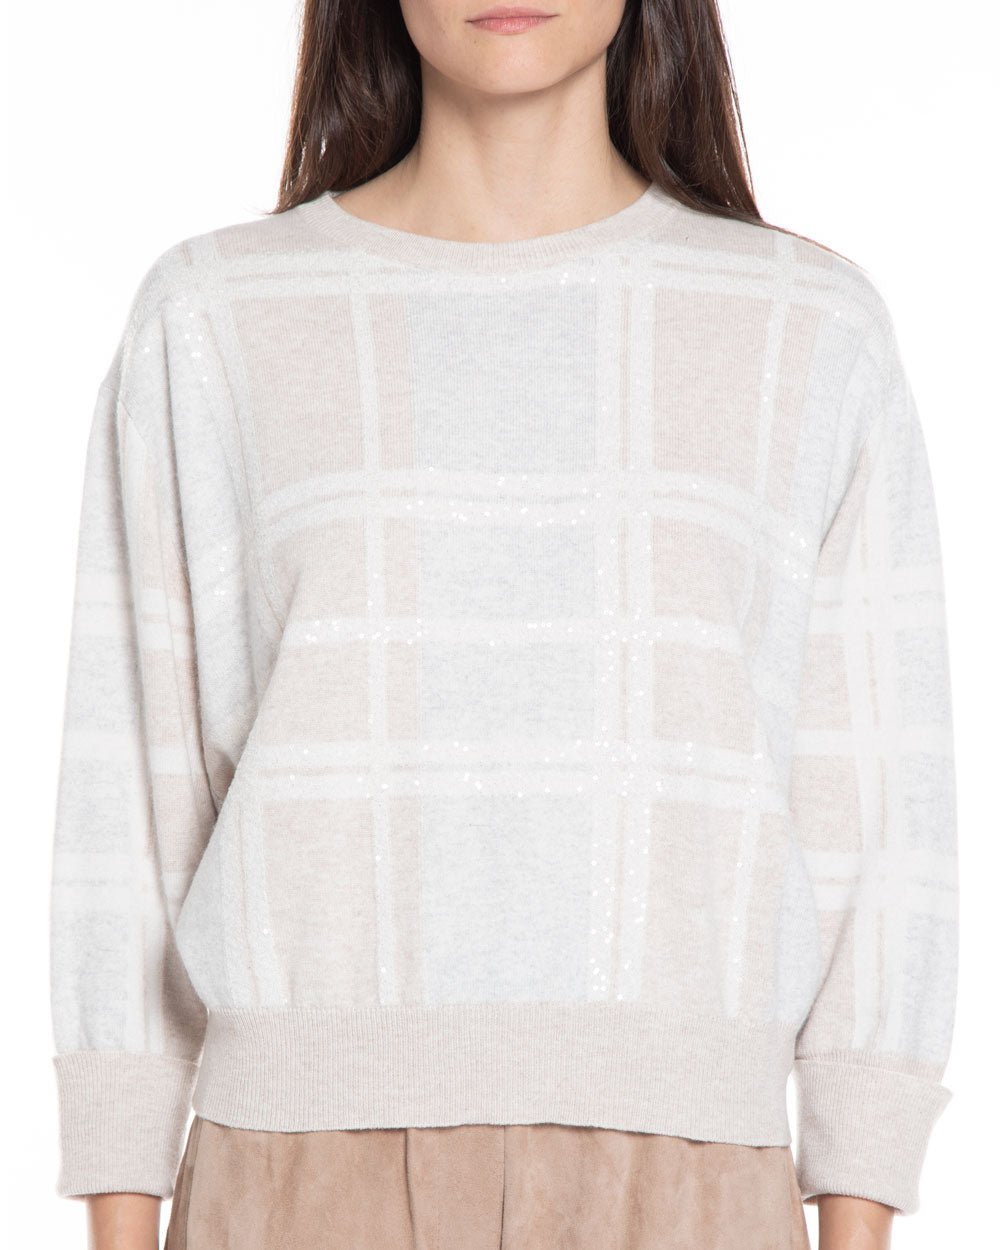 Oyster and Warm White Paillette Plaid Cashmere Blend Sweater